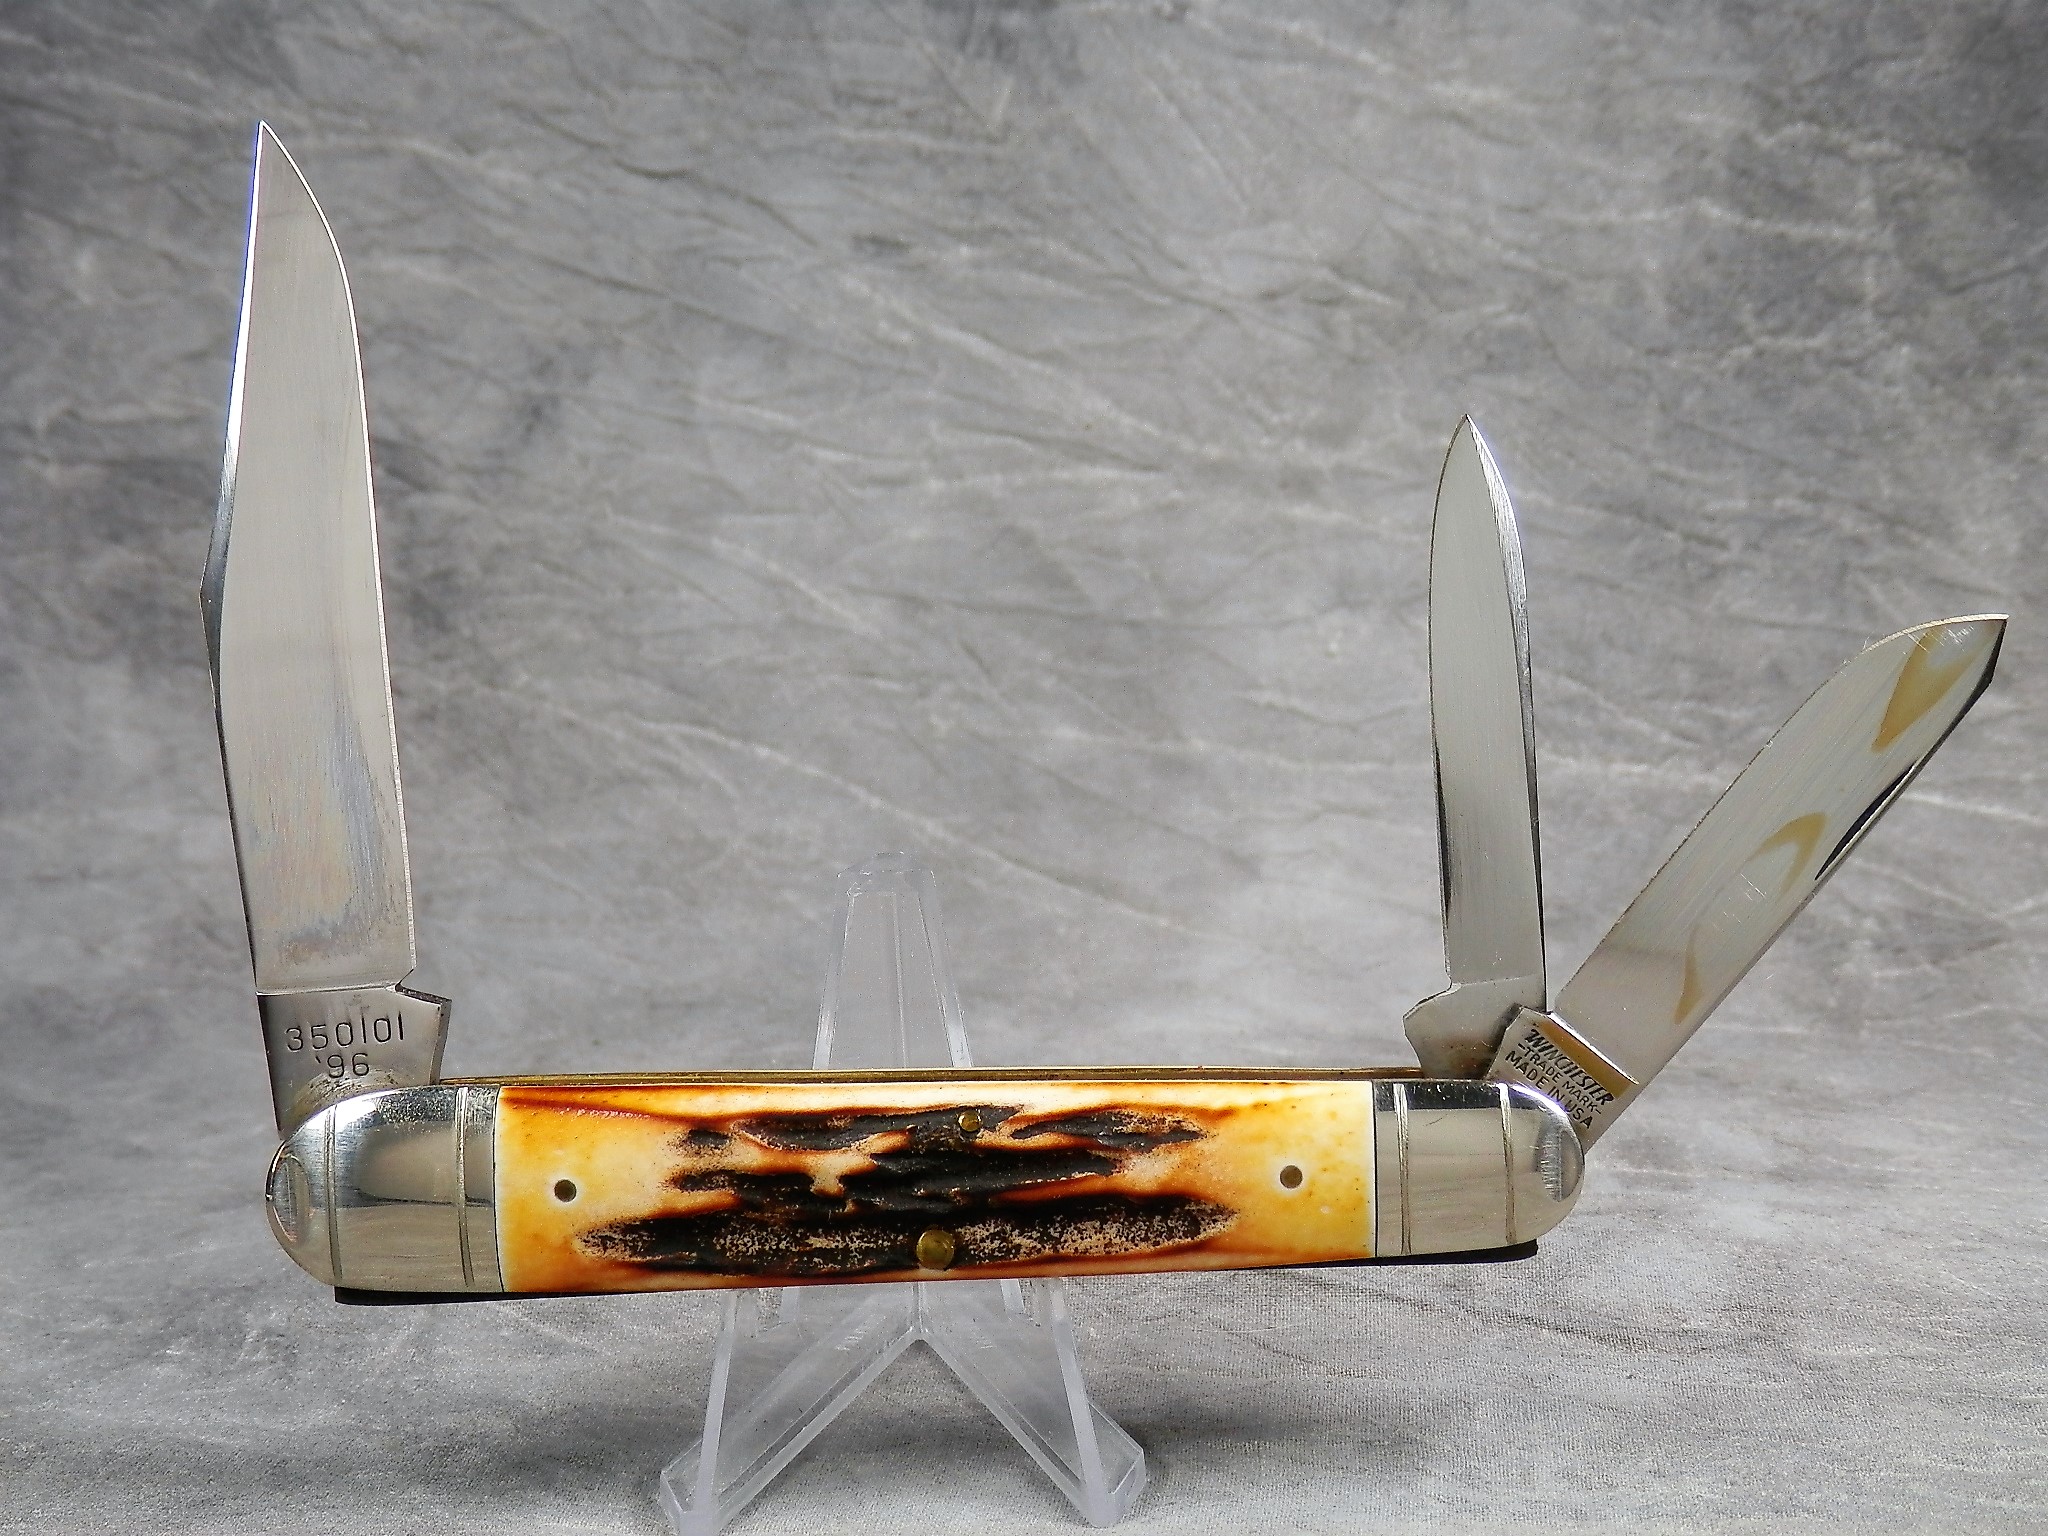 1996 WINCHESTER Stag Limited Edition NKCA Club 3-Blade Whittler Pocket Knife